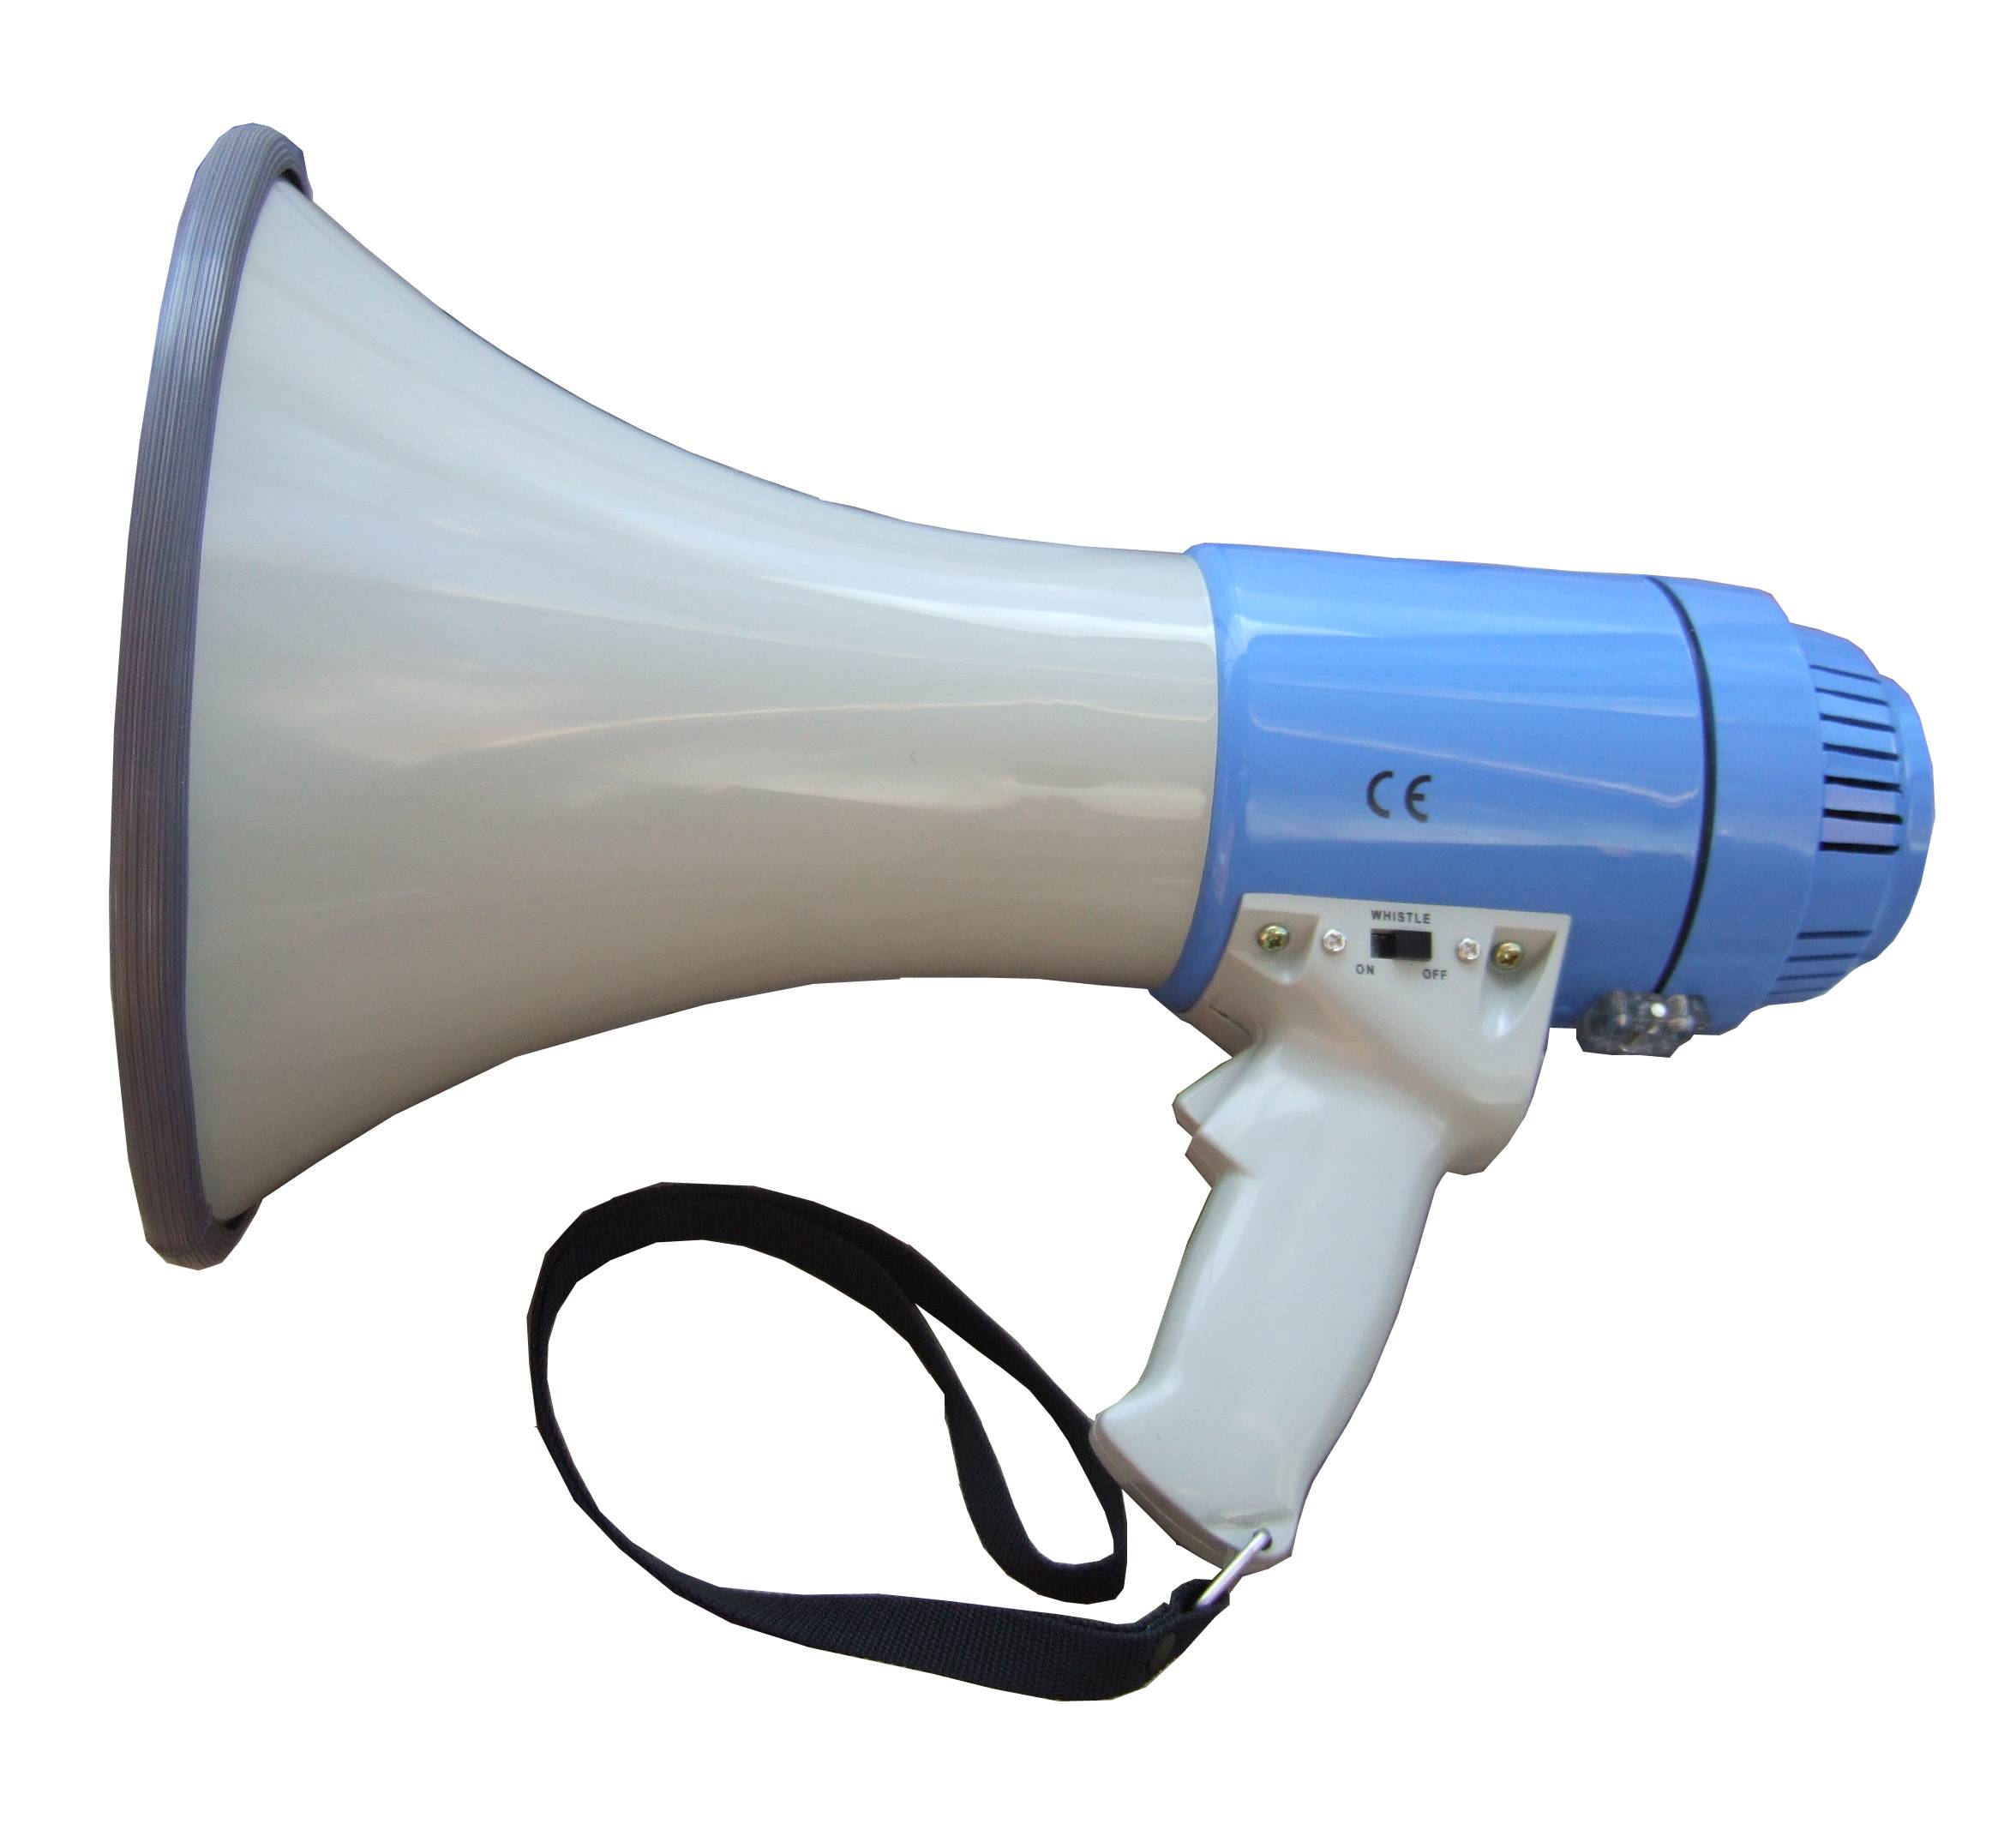 Megaphone 25 watts, range of 1 milles with Whistle